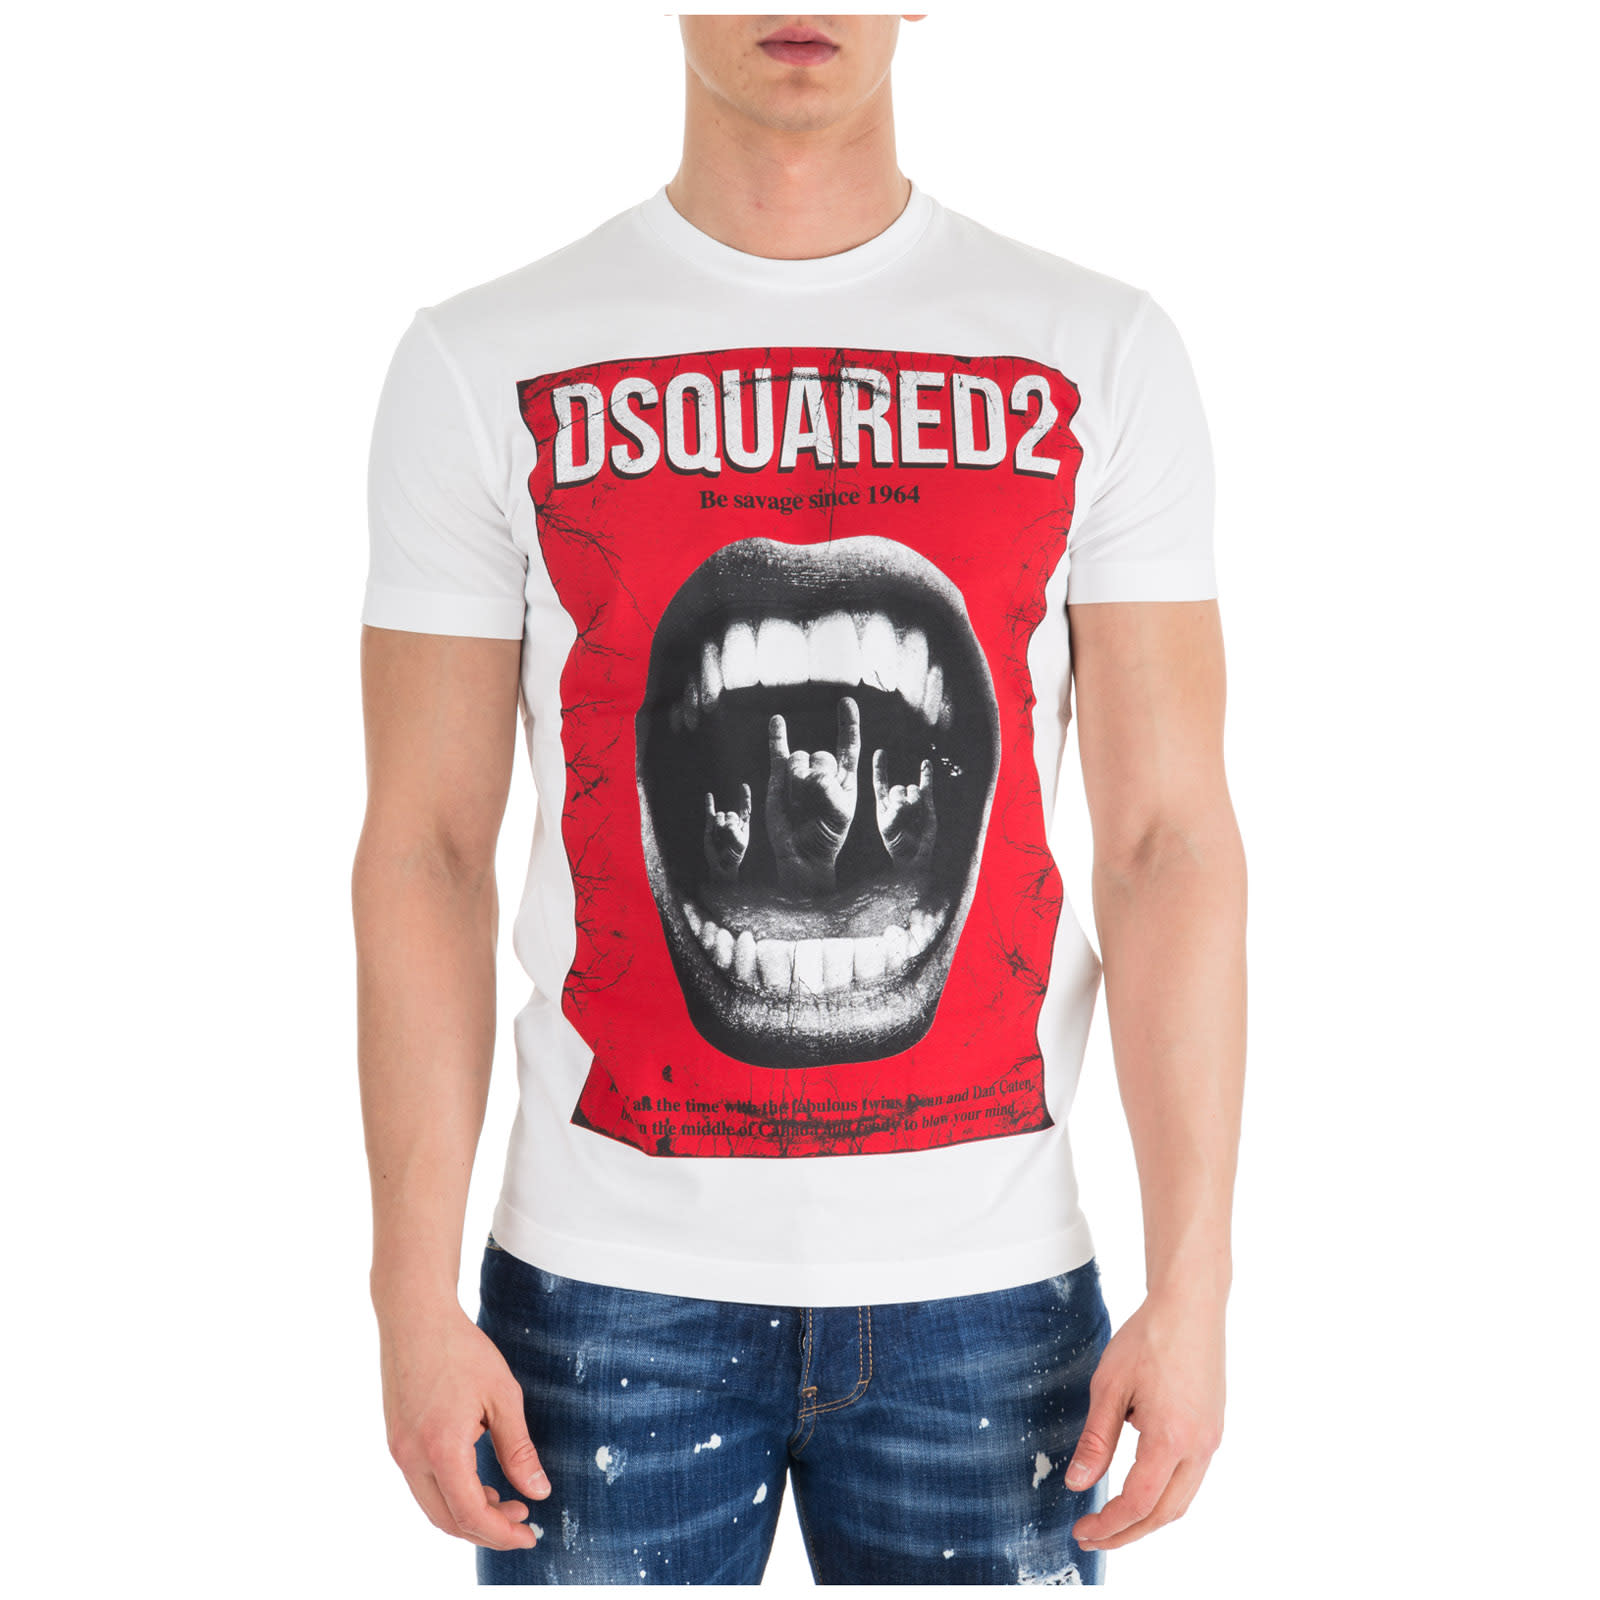 dsquared2 be savage since 1964